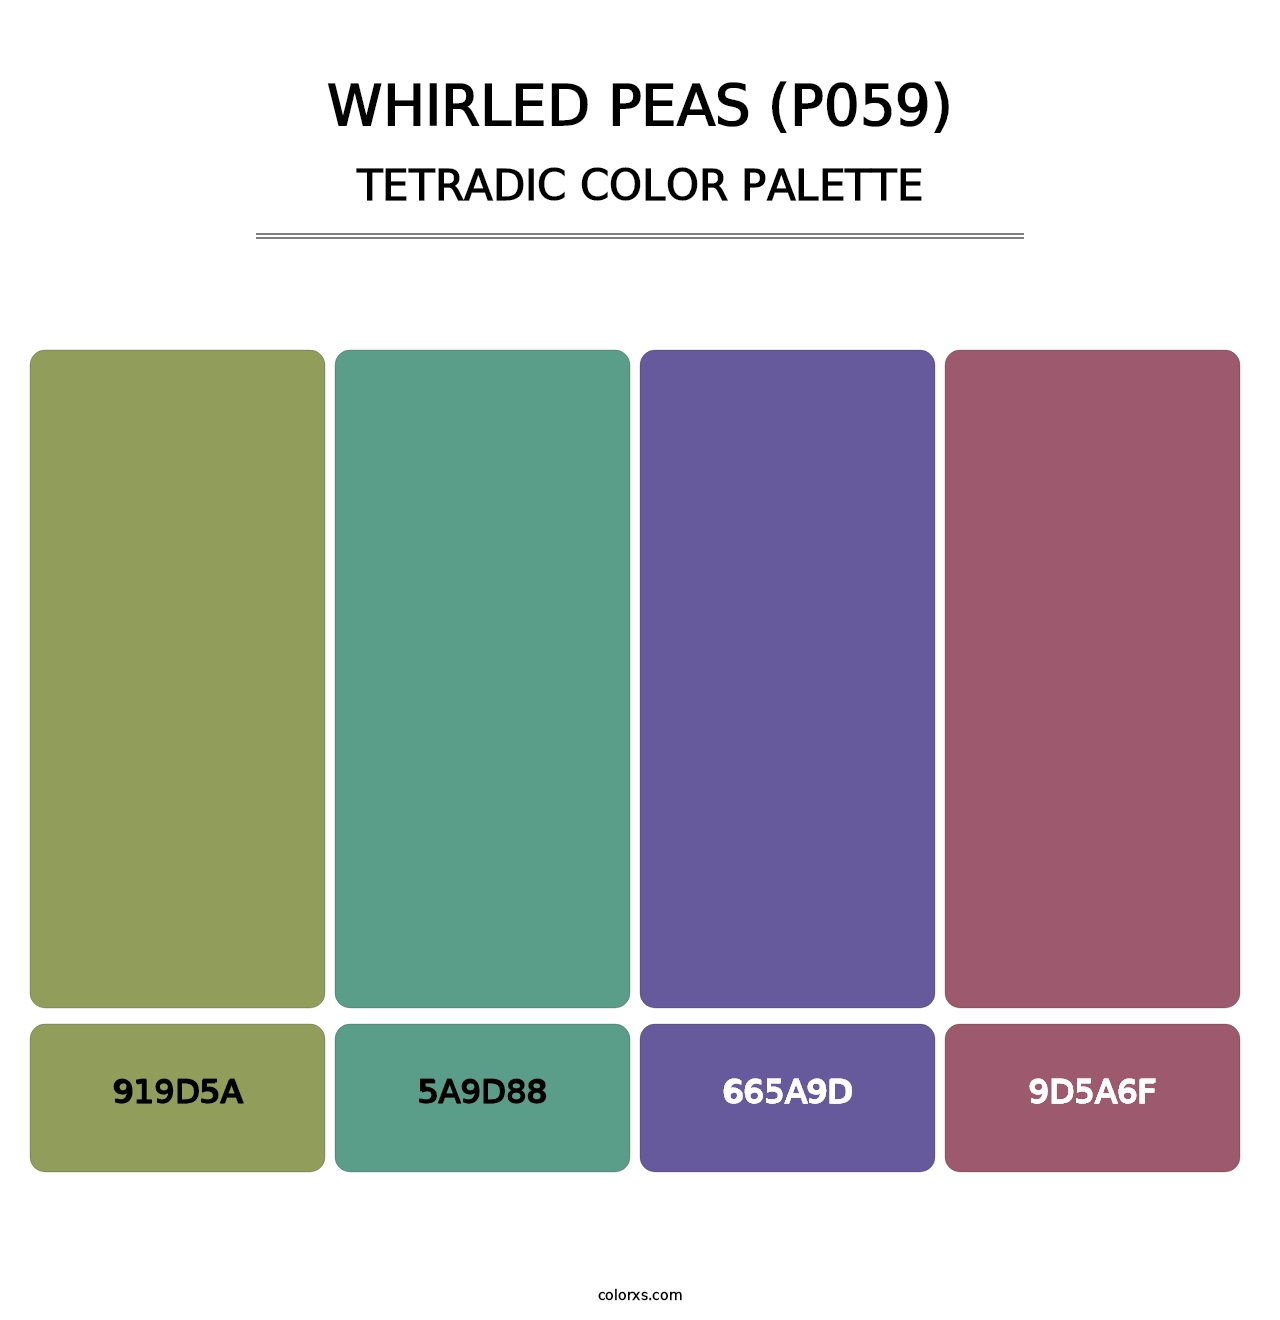 Whirled Peas (P059) - Tetradic Color Palette